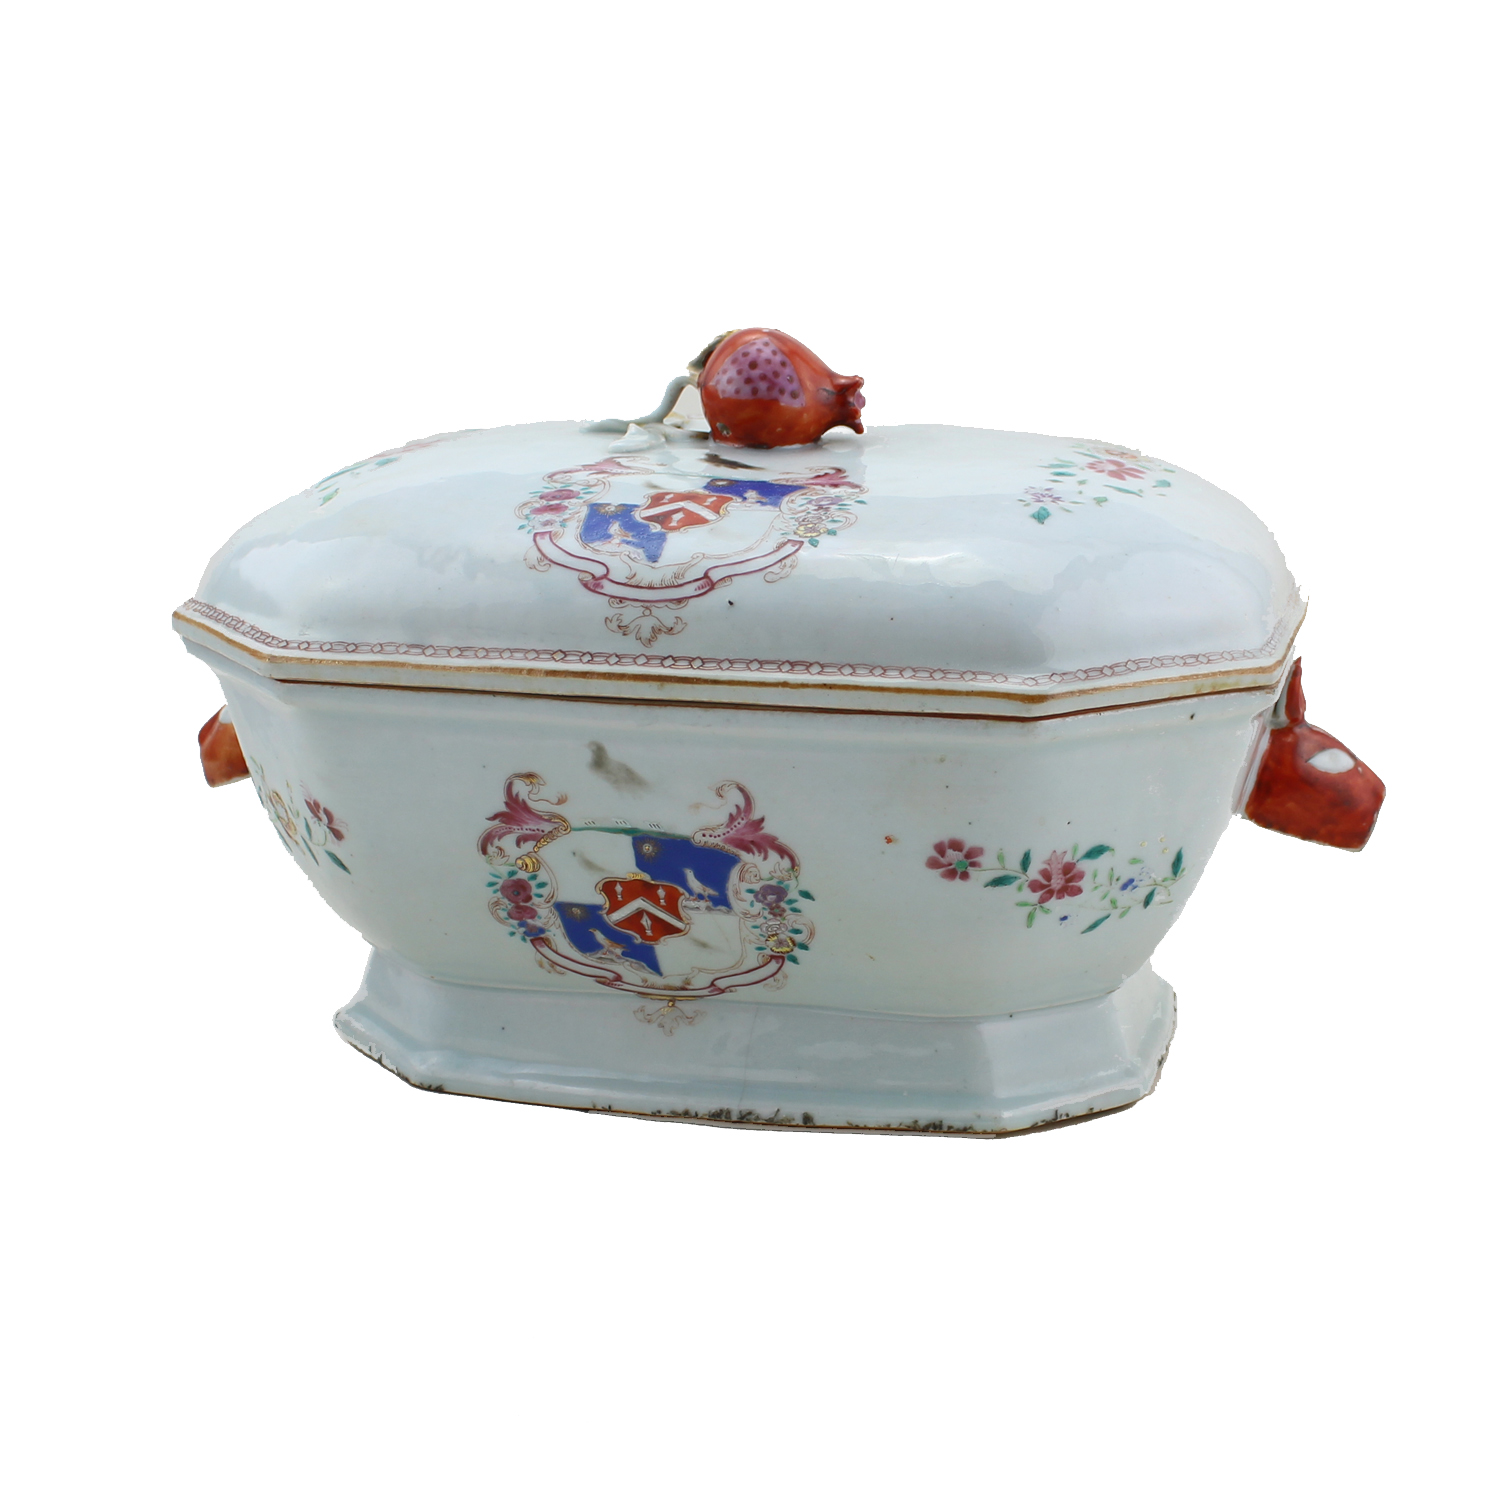 Chinese Export Armorial tureen with cover, 18th/19th century